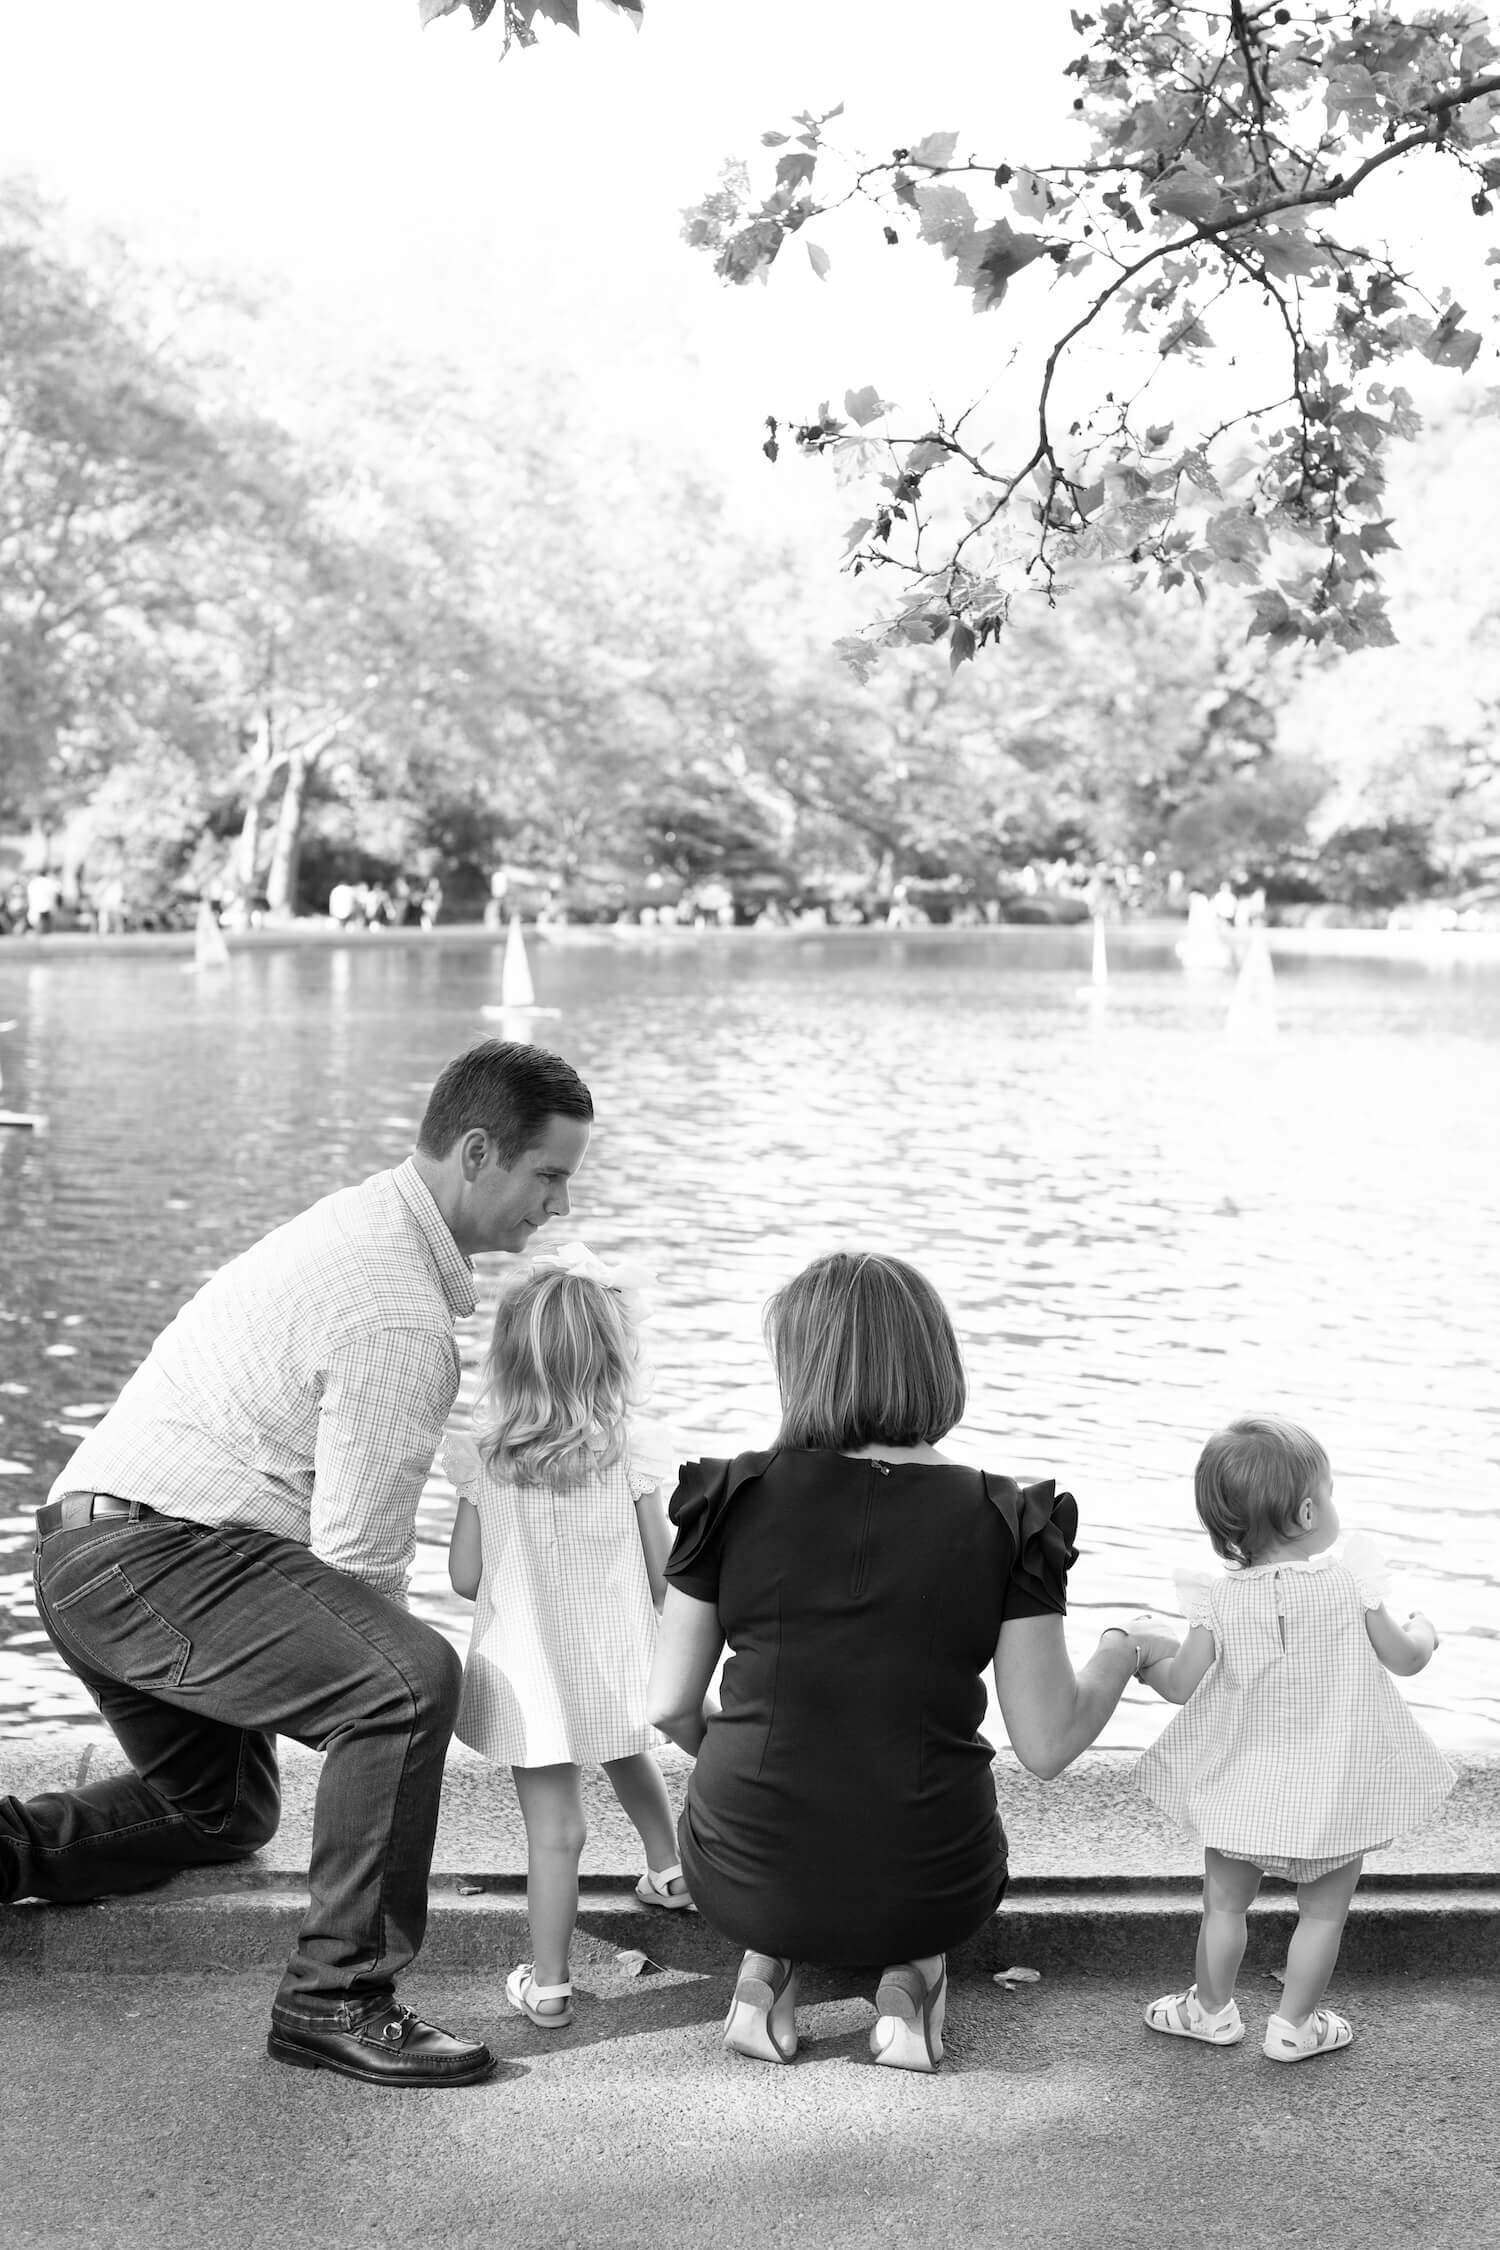 New York Family Photographer, Jacqueline Clair Photography features their latest family session in Central Park